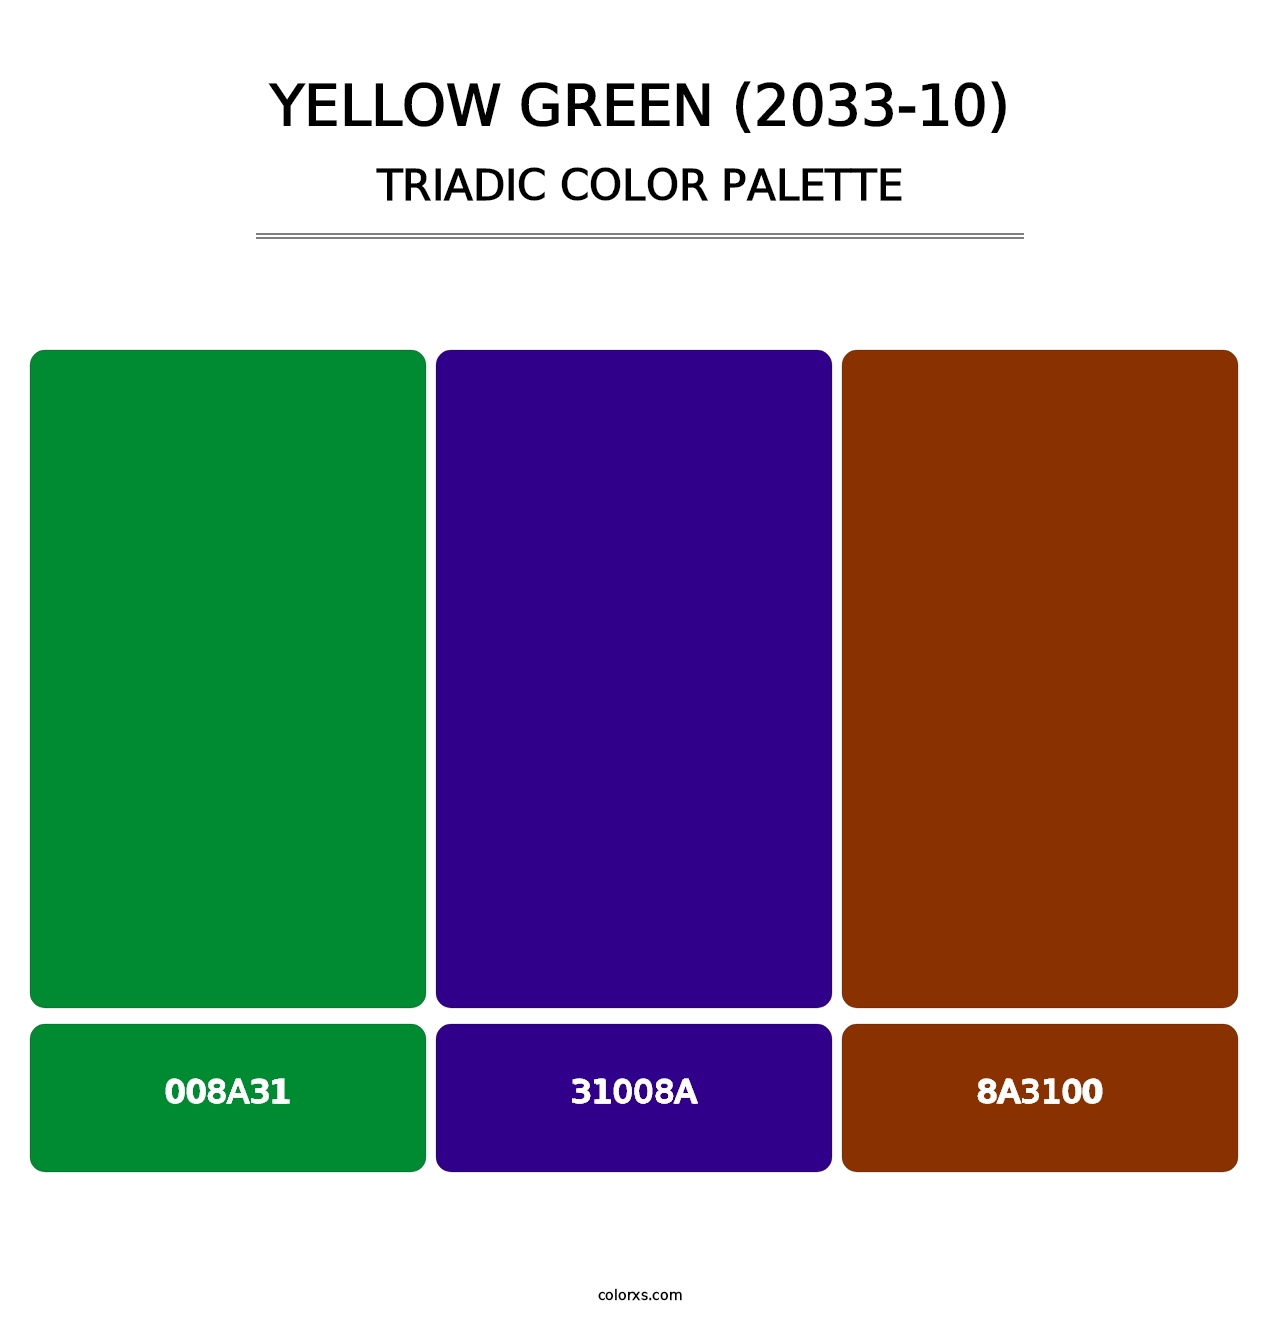 Yellow Green (2033-10) - Triadic Color Palette